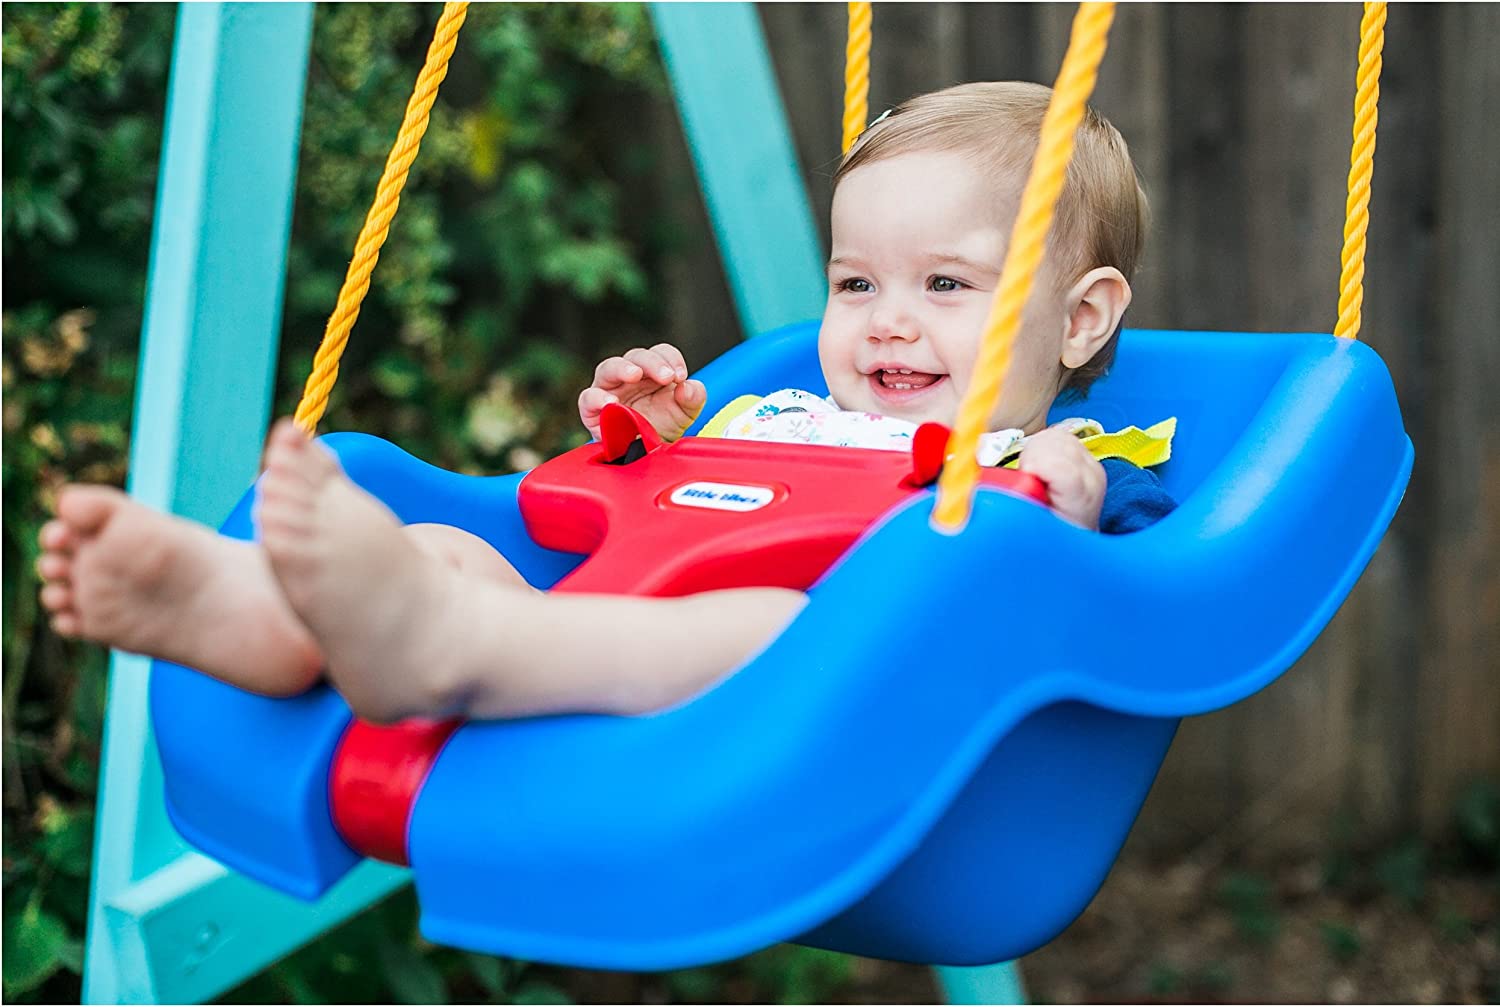 Little Tikes 2-in-1 Snug and Secure Swing, High Back Swing, Blue - image 6 of 7